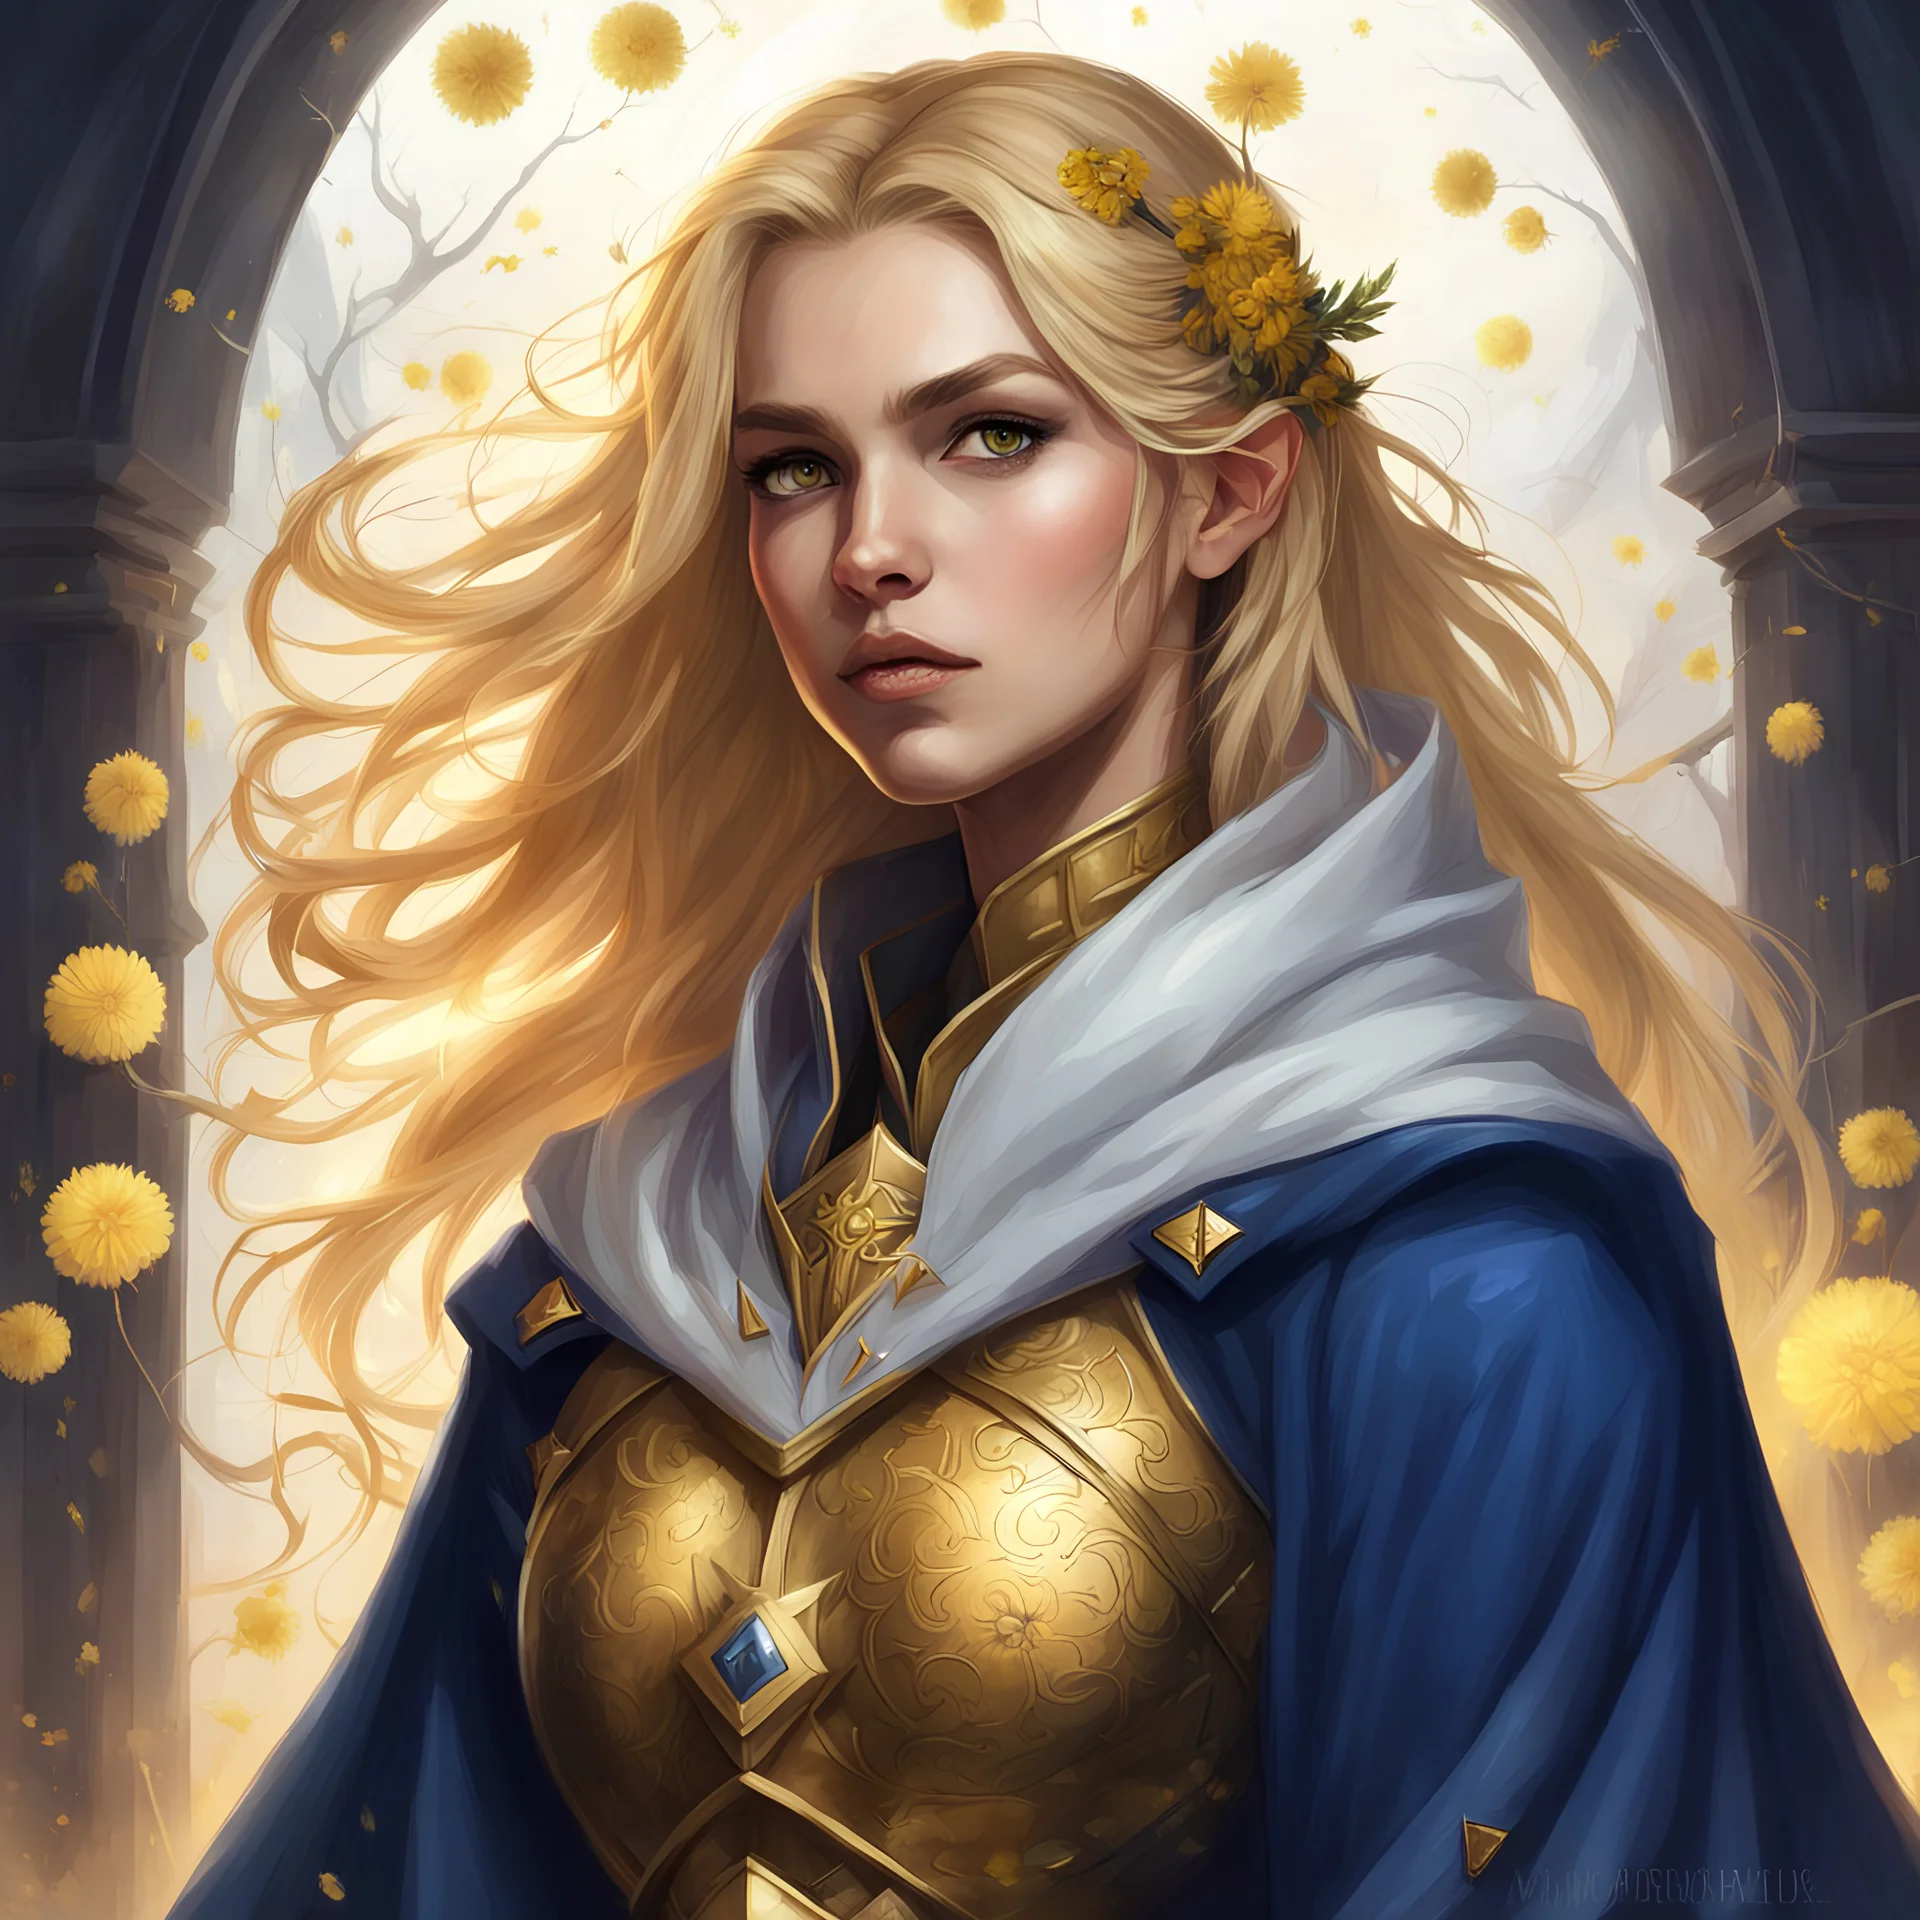 dungeons & dragons; digital art; portrait; female; cleric; gold eyes; golden hair; young woman; robes; long veil; soft clothes; dark blue and gold robes; robes with armor; cleric of bahamut; dandelions; teenager; traveling;